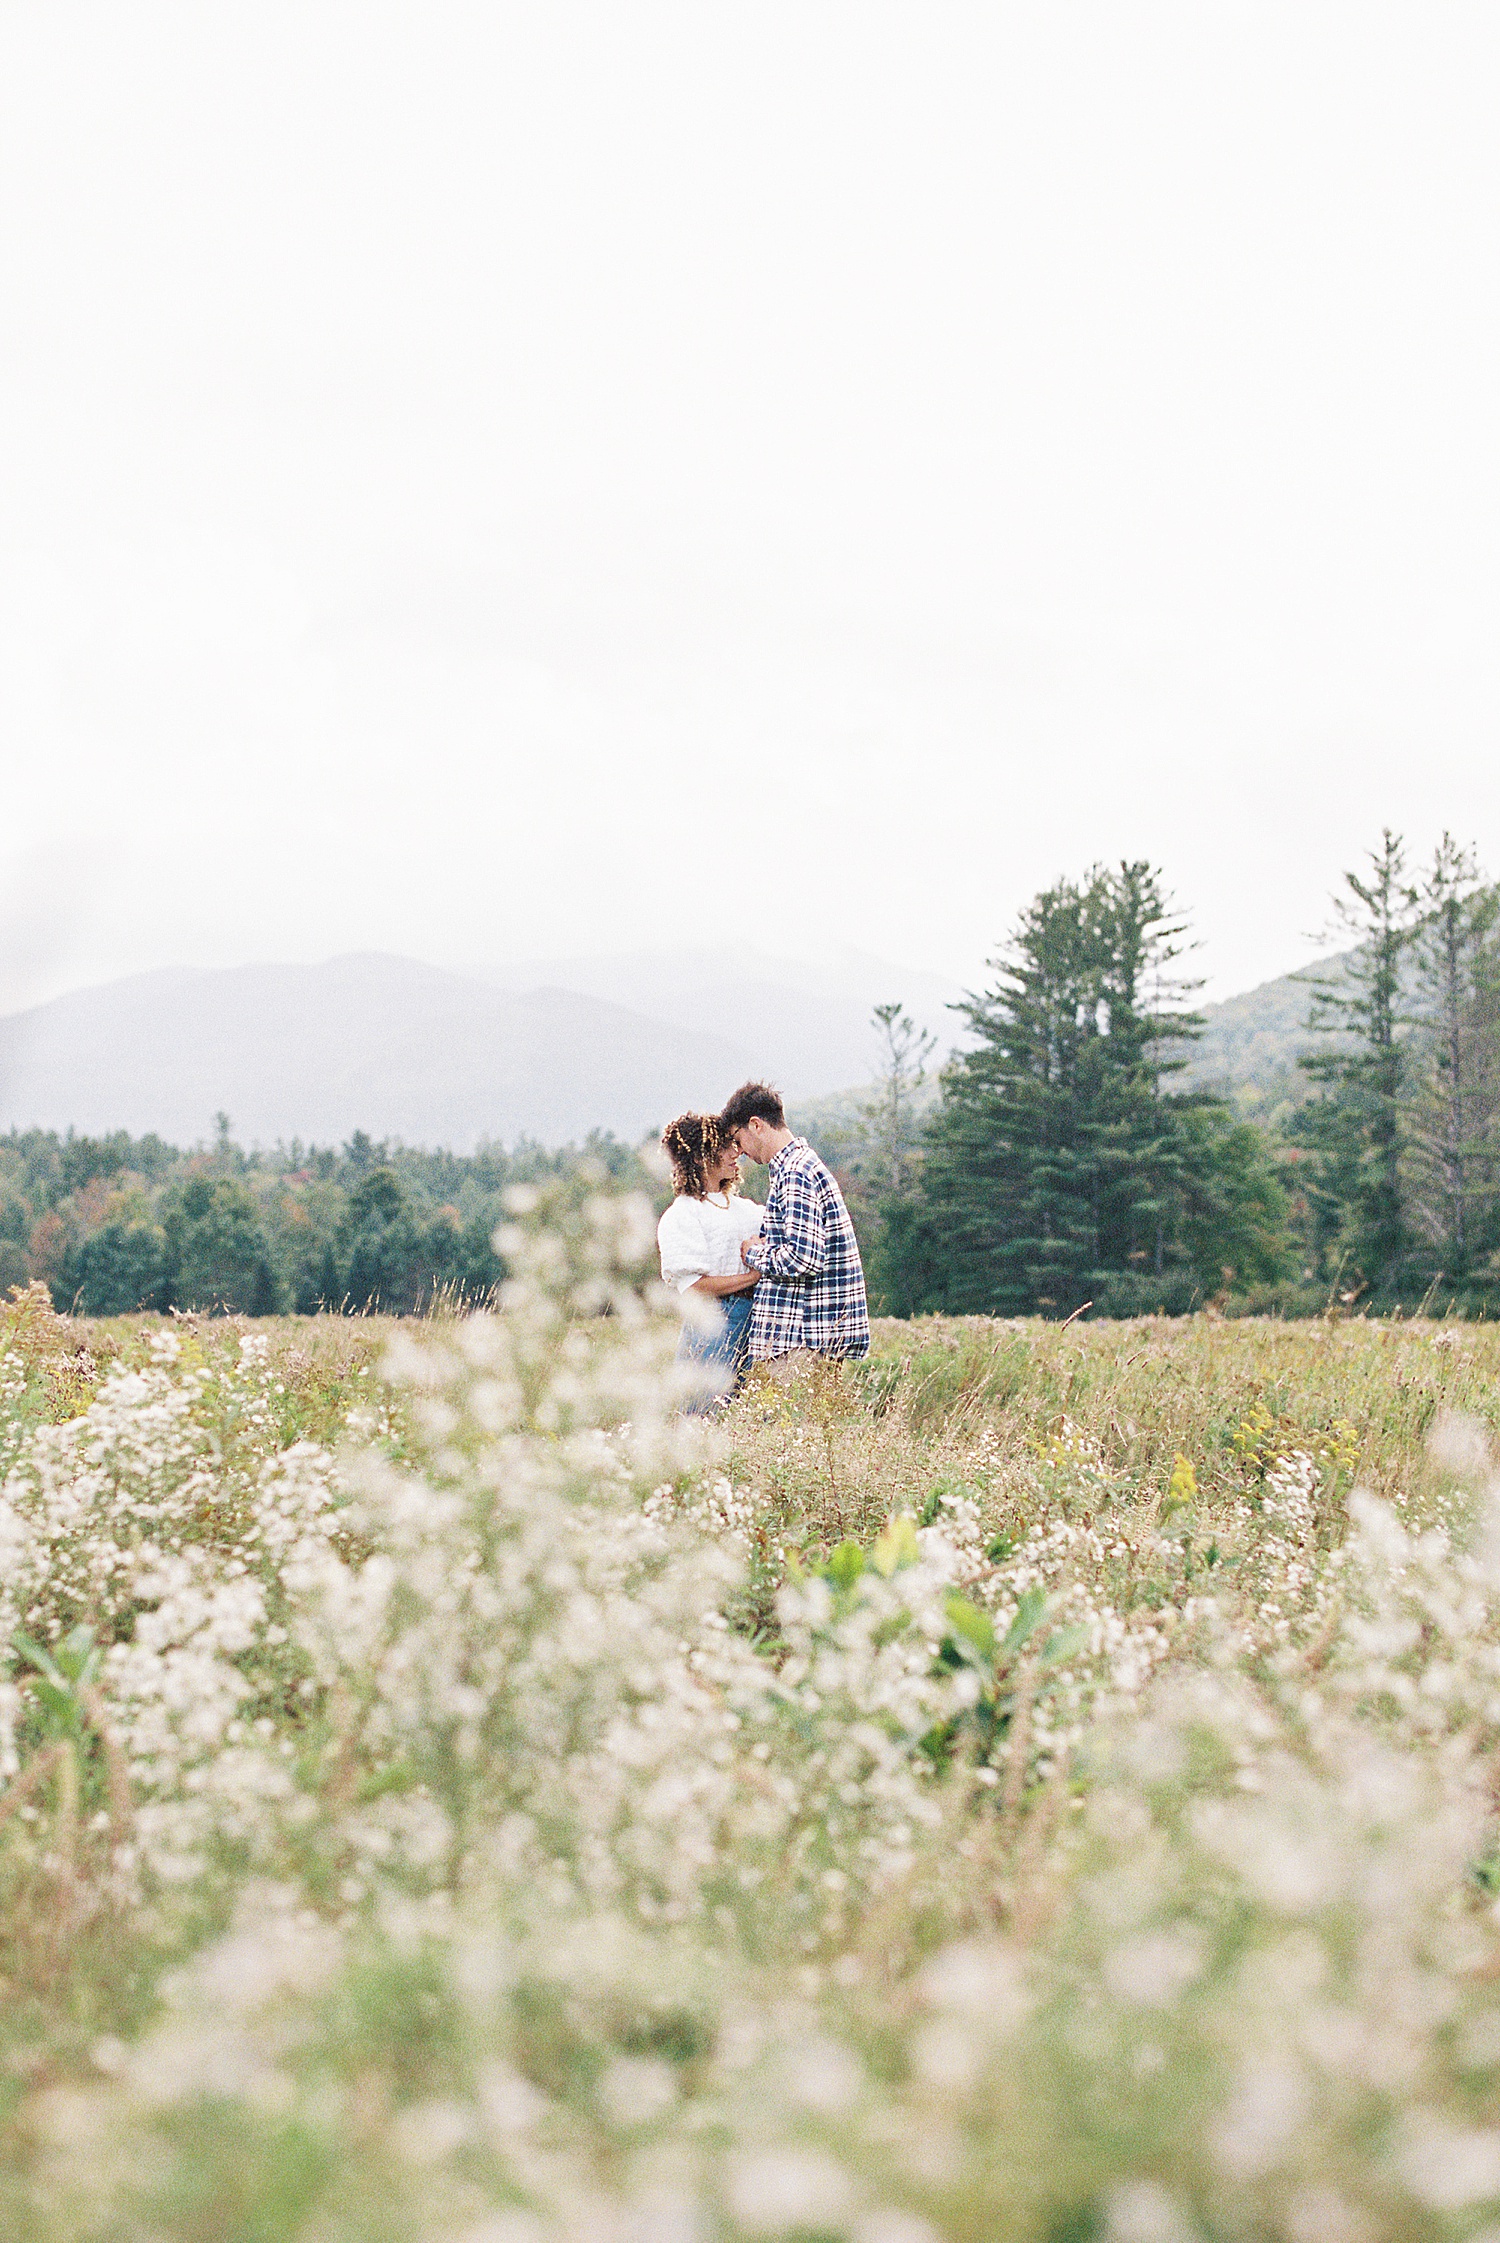 Man and woman embracing in a field of flowers with the foggy mountains in the background for their portrait photo shoot. 